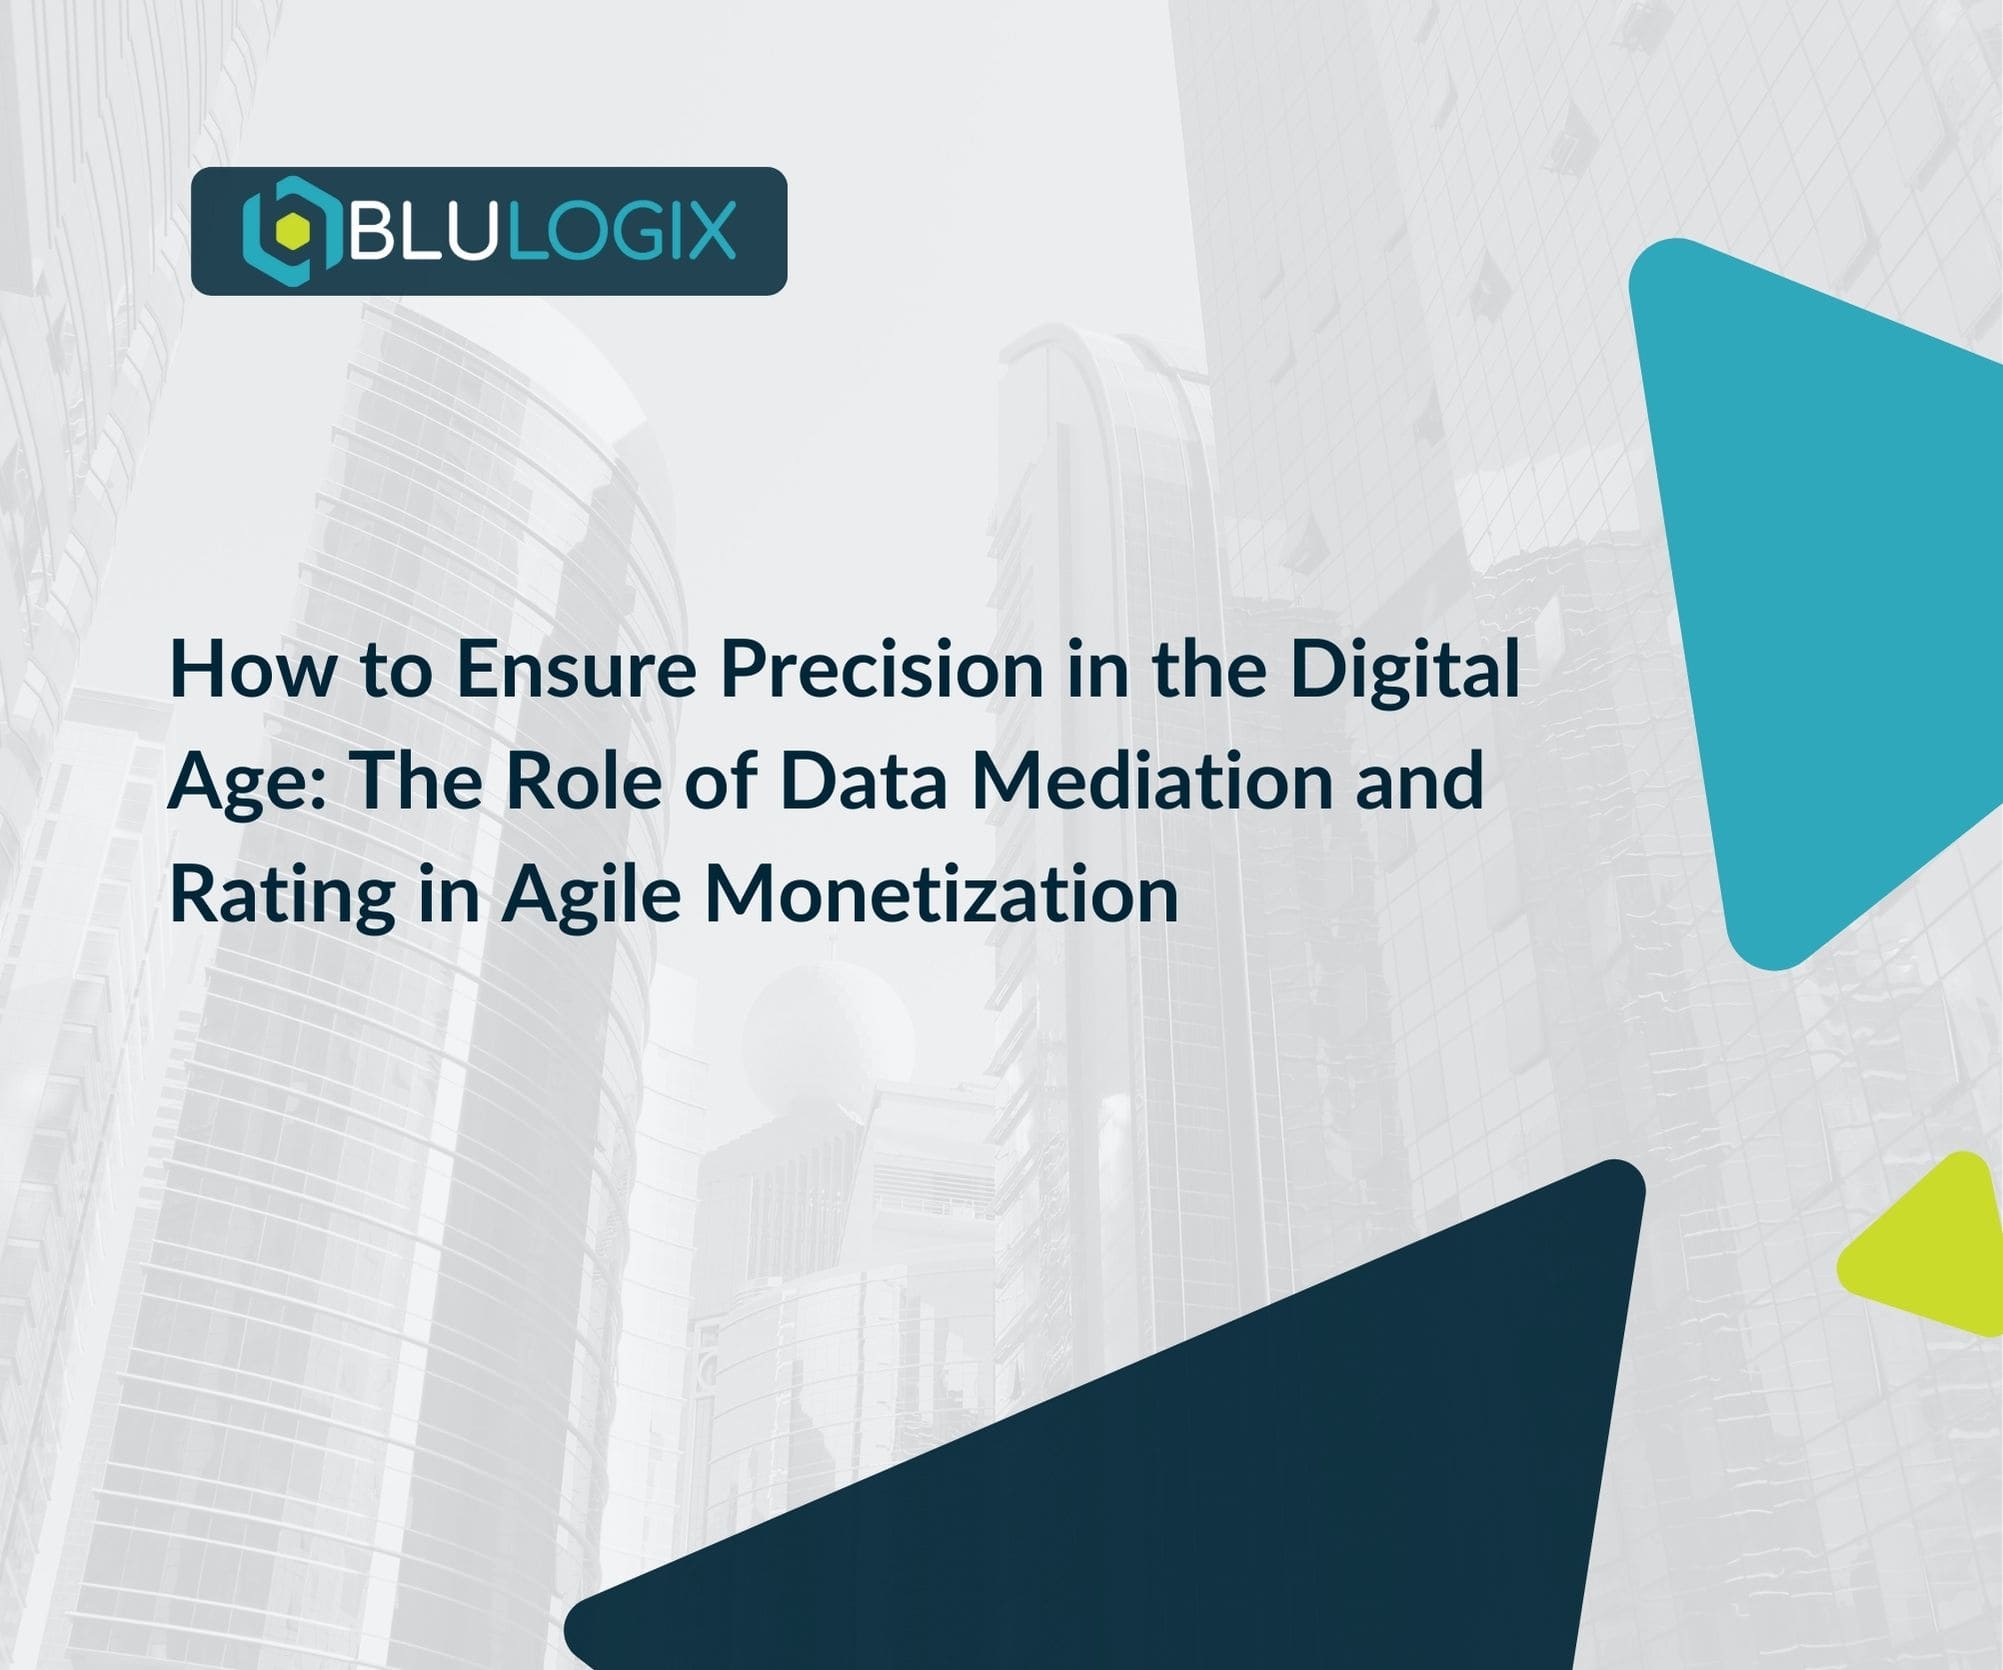 How to Ensure Precision in the Digital Age The Role of Data Mediation and Rating in Agile Monetization